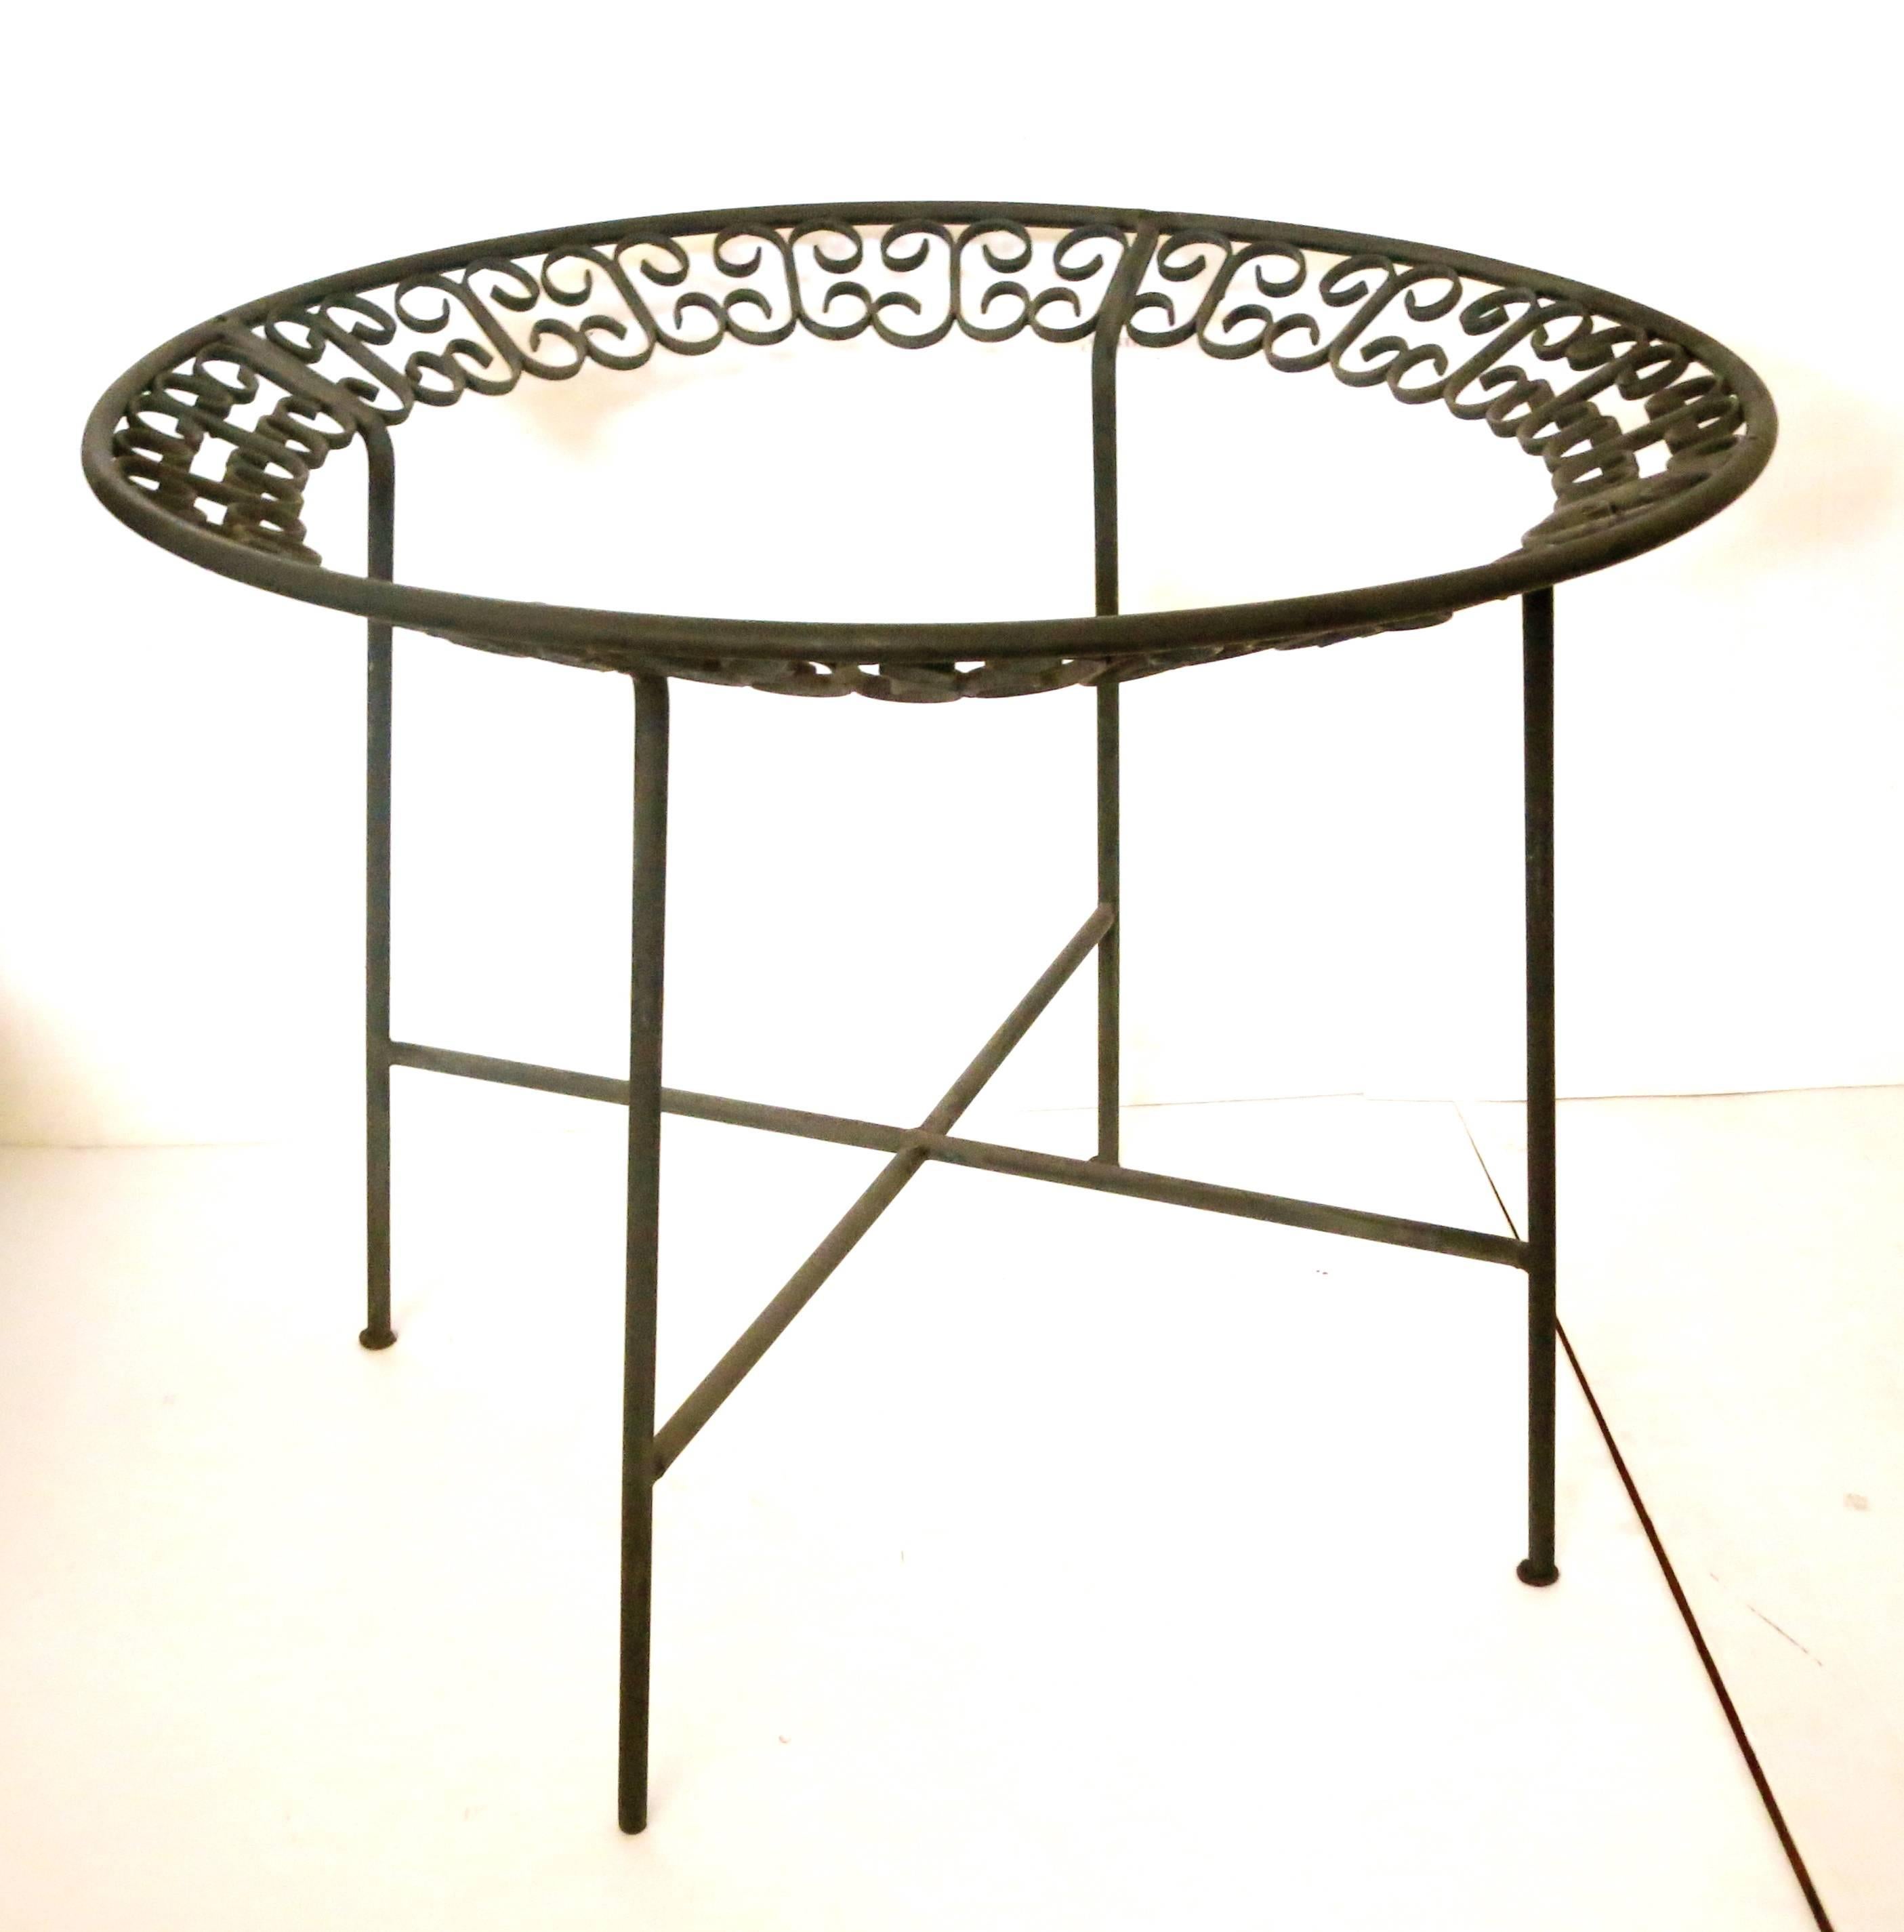 1950s petite black enameled dining table great for indoor or outdoor, part of the Grenada series, nice 1/2